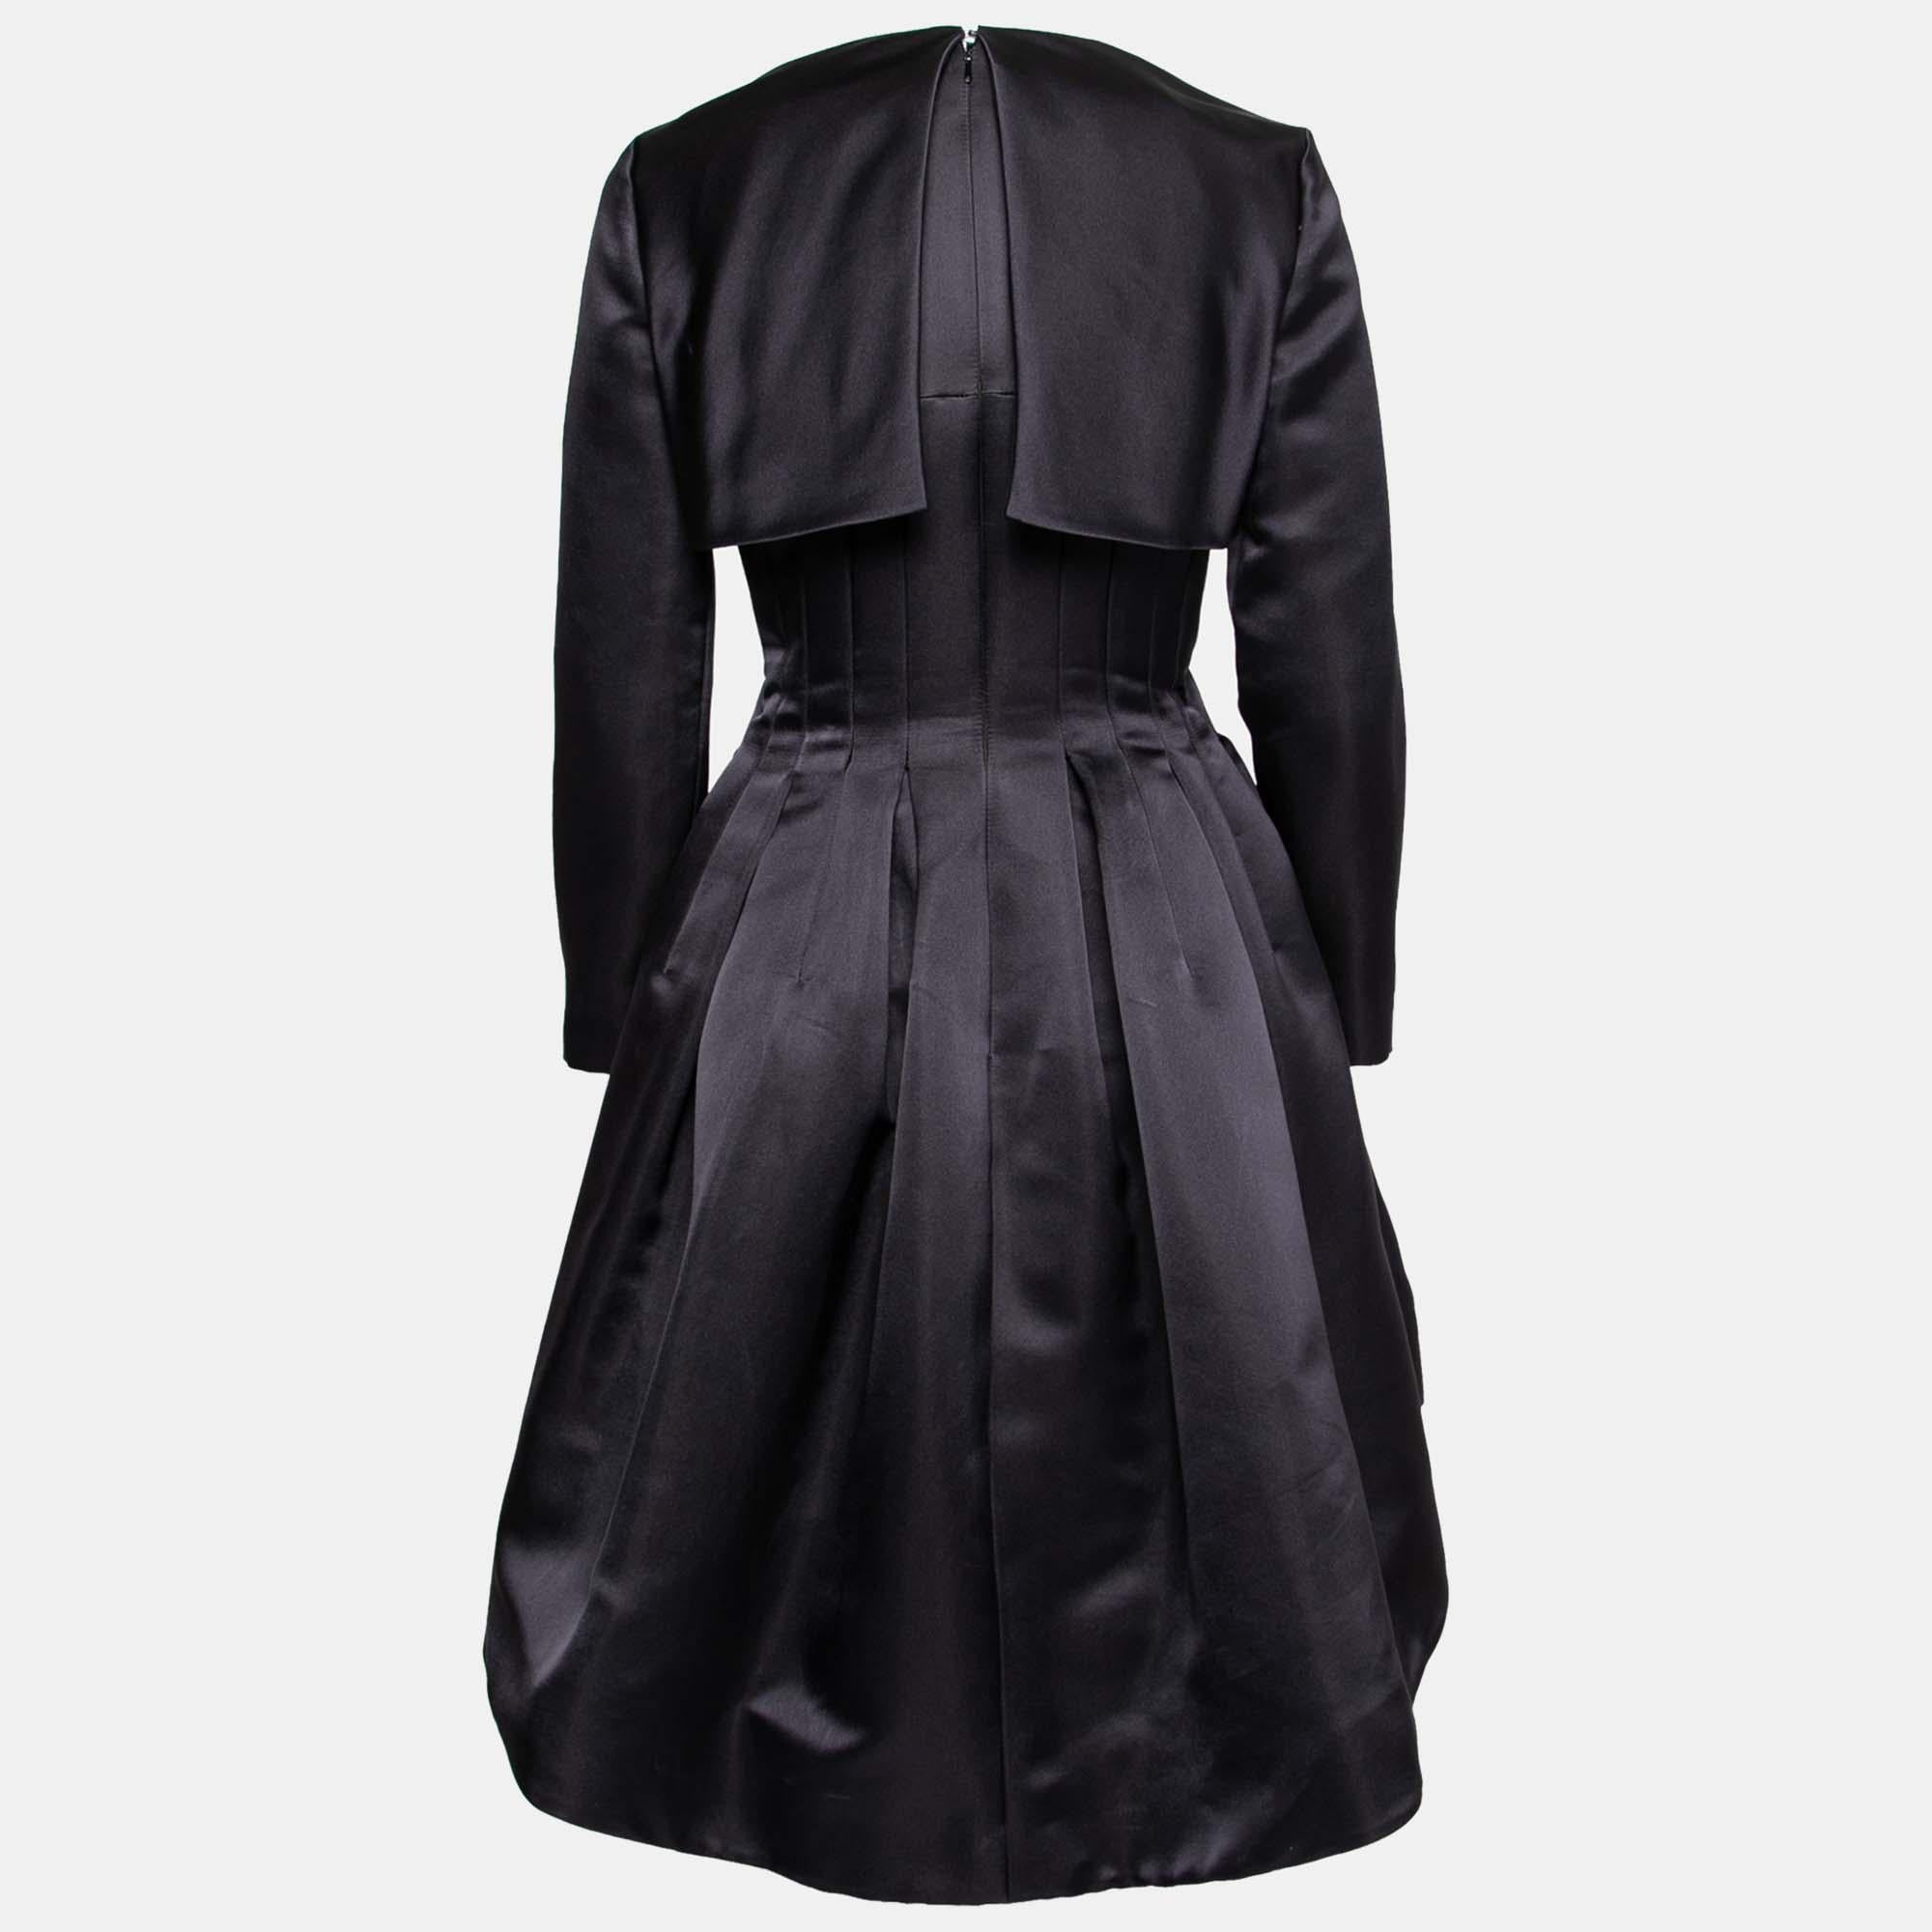 This Dior crop jacket dress is sure to be the topic of the evening! The stunning navy blue dress is sleeveless while the jacket has long sleeves. The dress is complete with a bow detail on the waist and a pleated silhouette. Truly fit for those